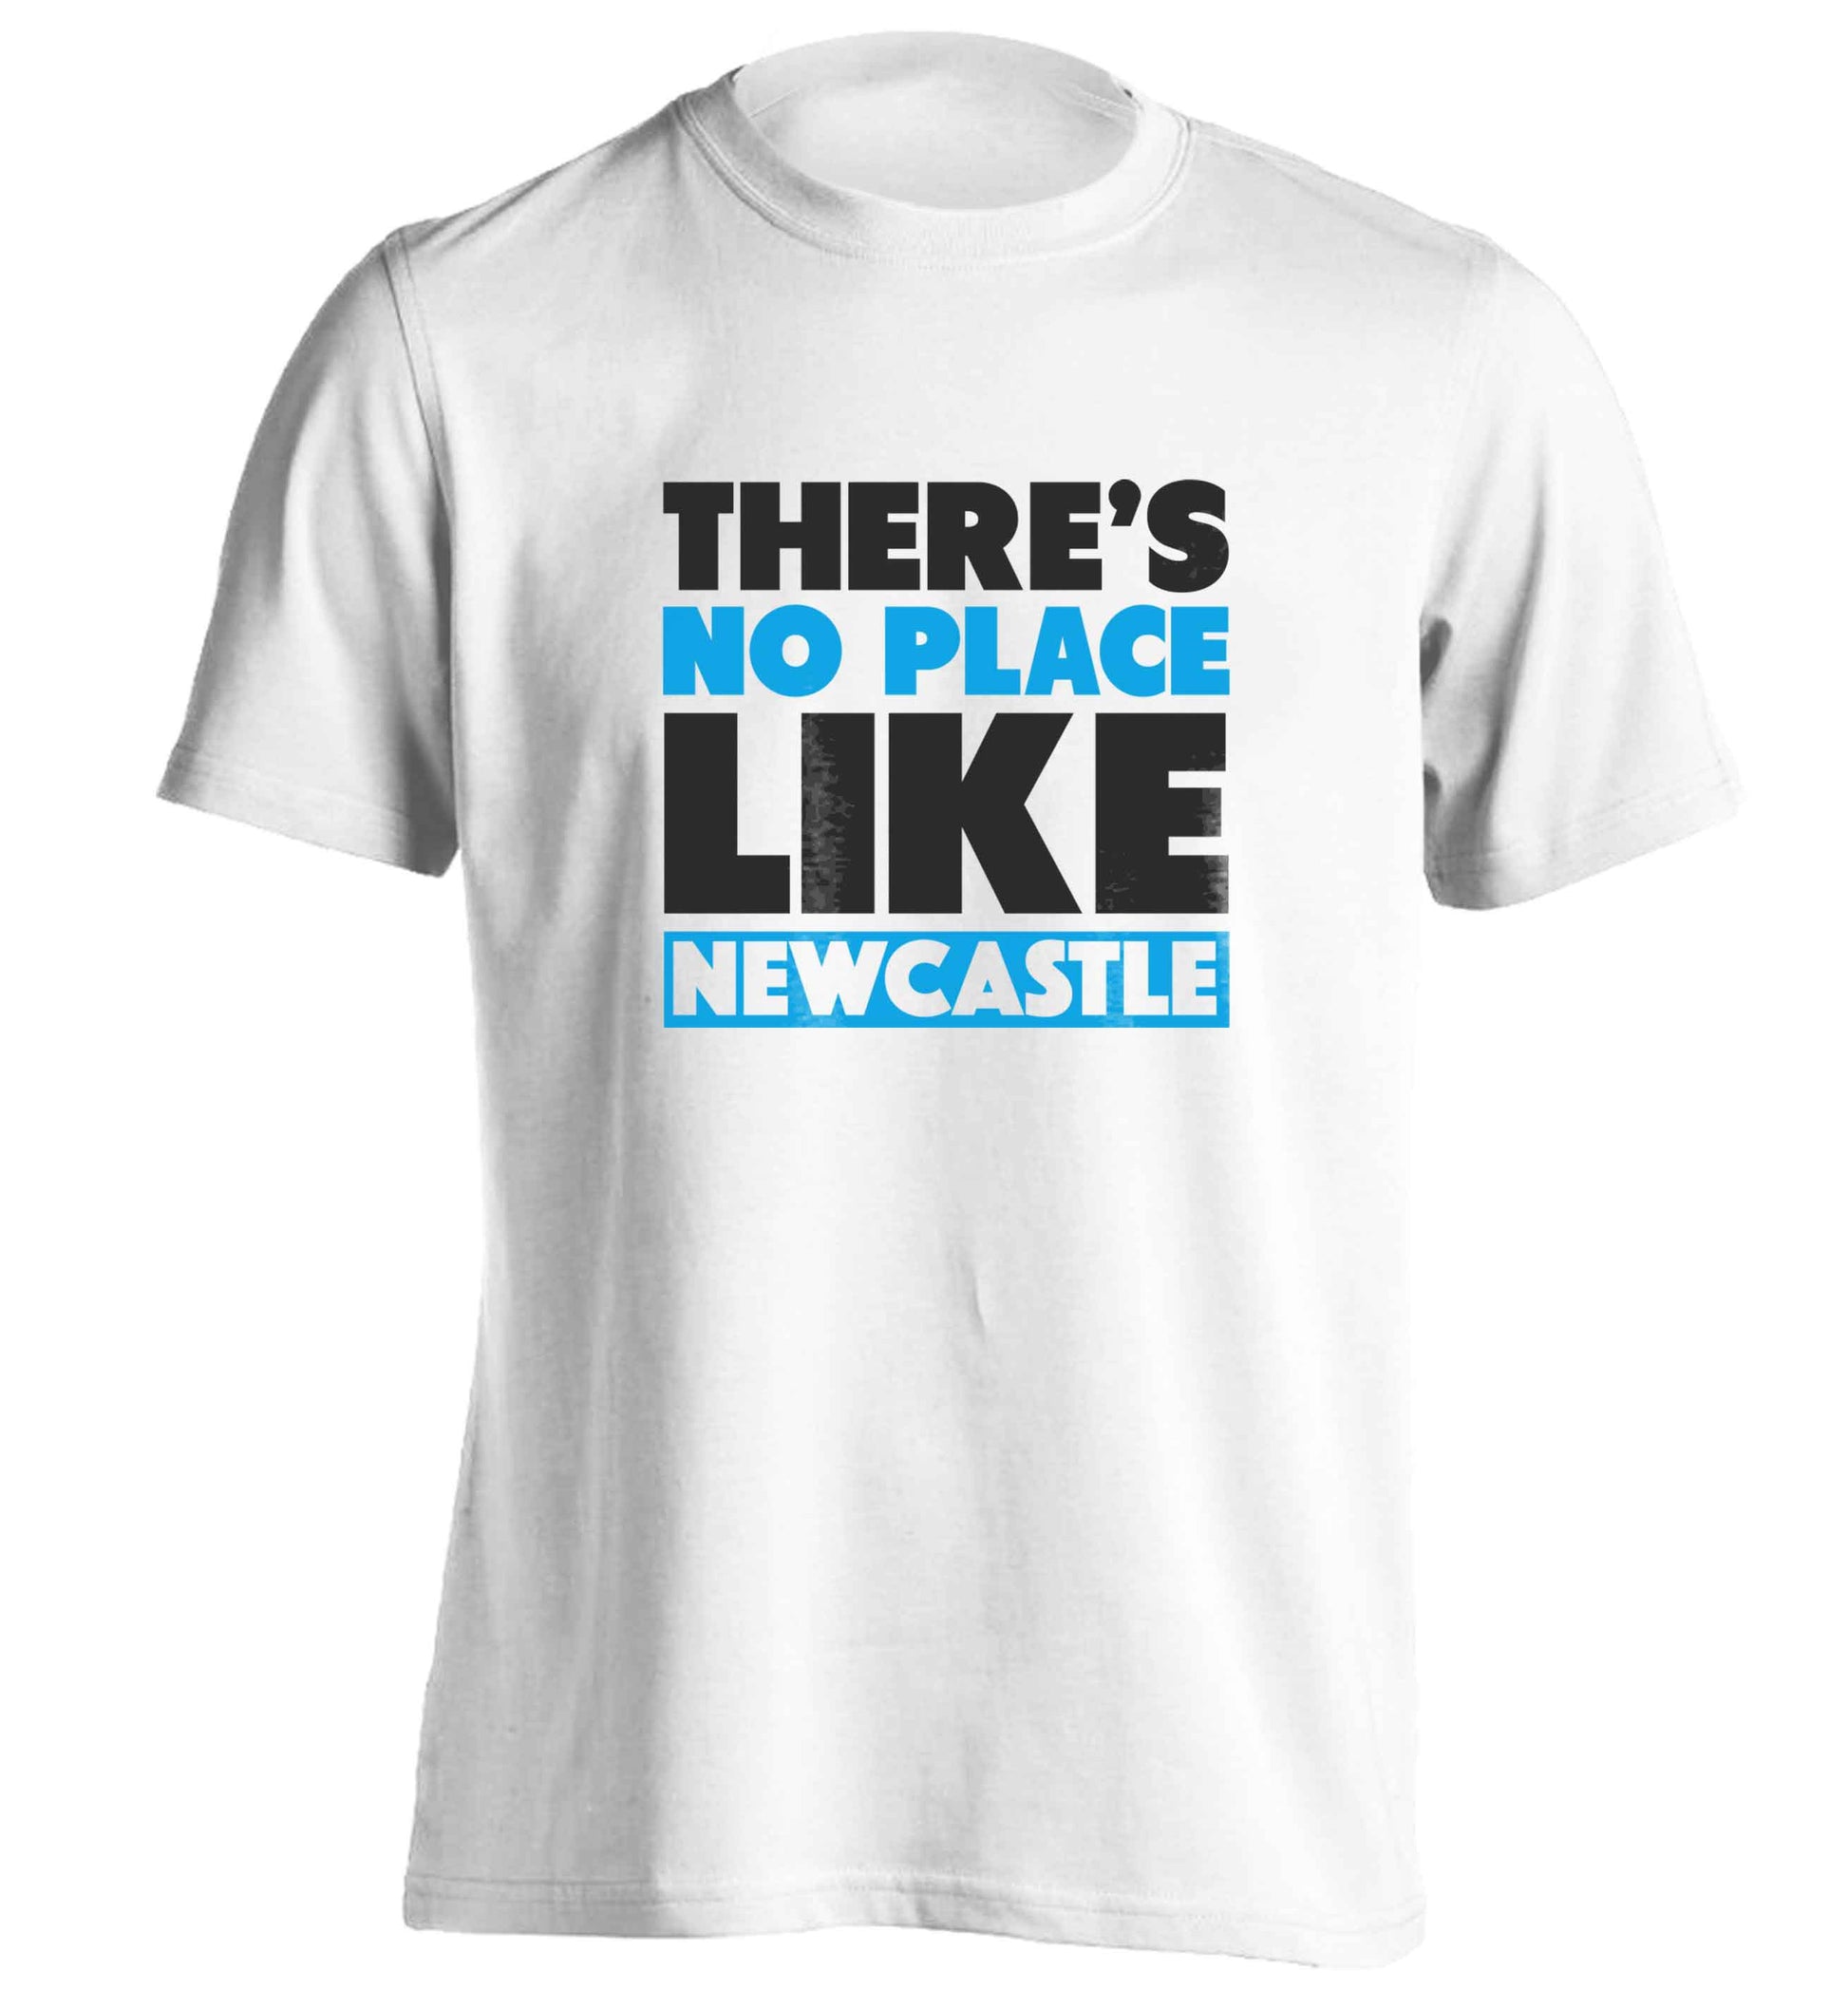 There's no place like Newcastle adults unisex white Tshirt 2XL